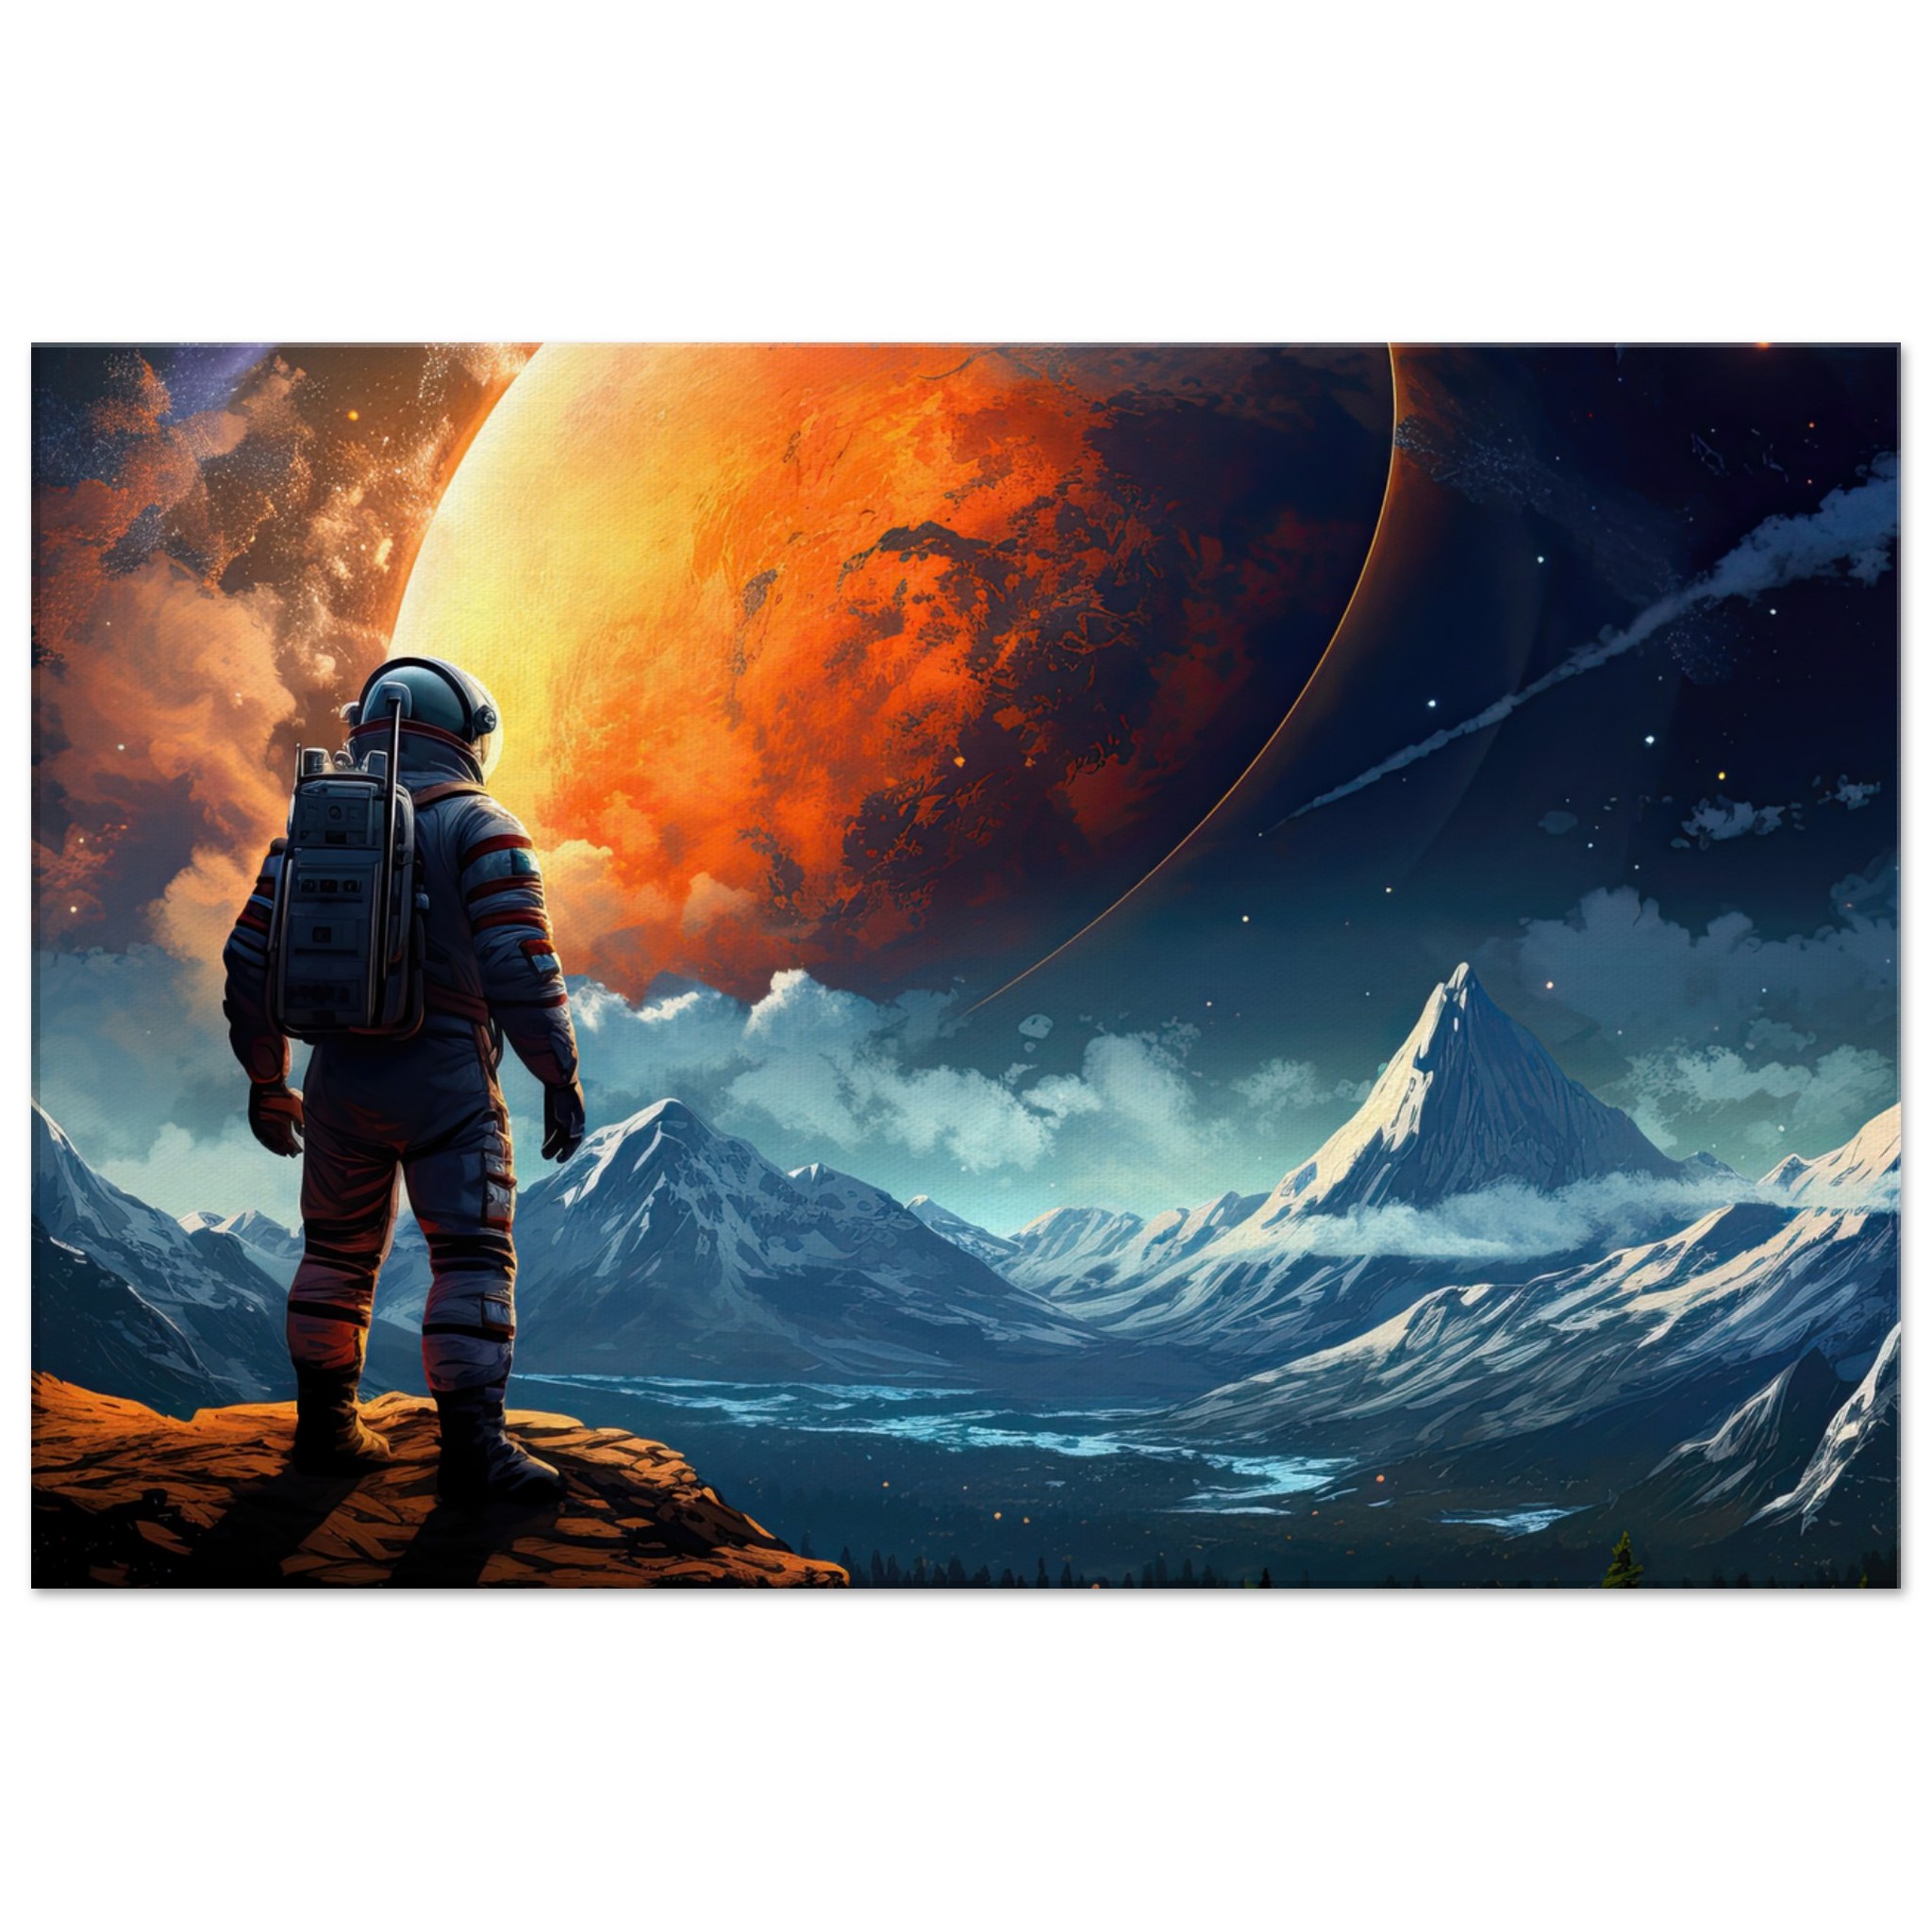 The Great Moon – Astronaut Canvas Print – 60×90 cm / 24×36″, Thick